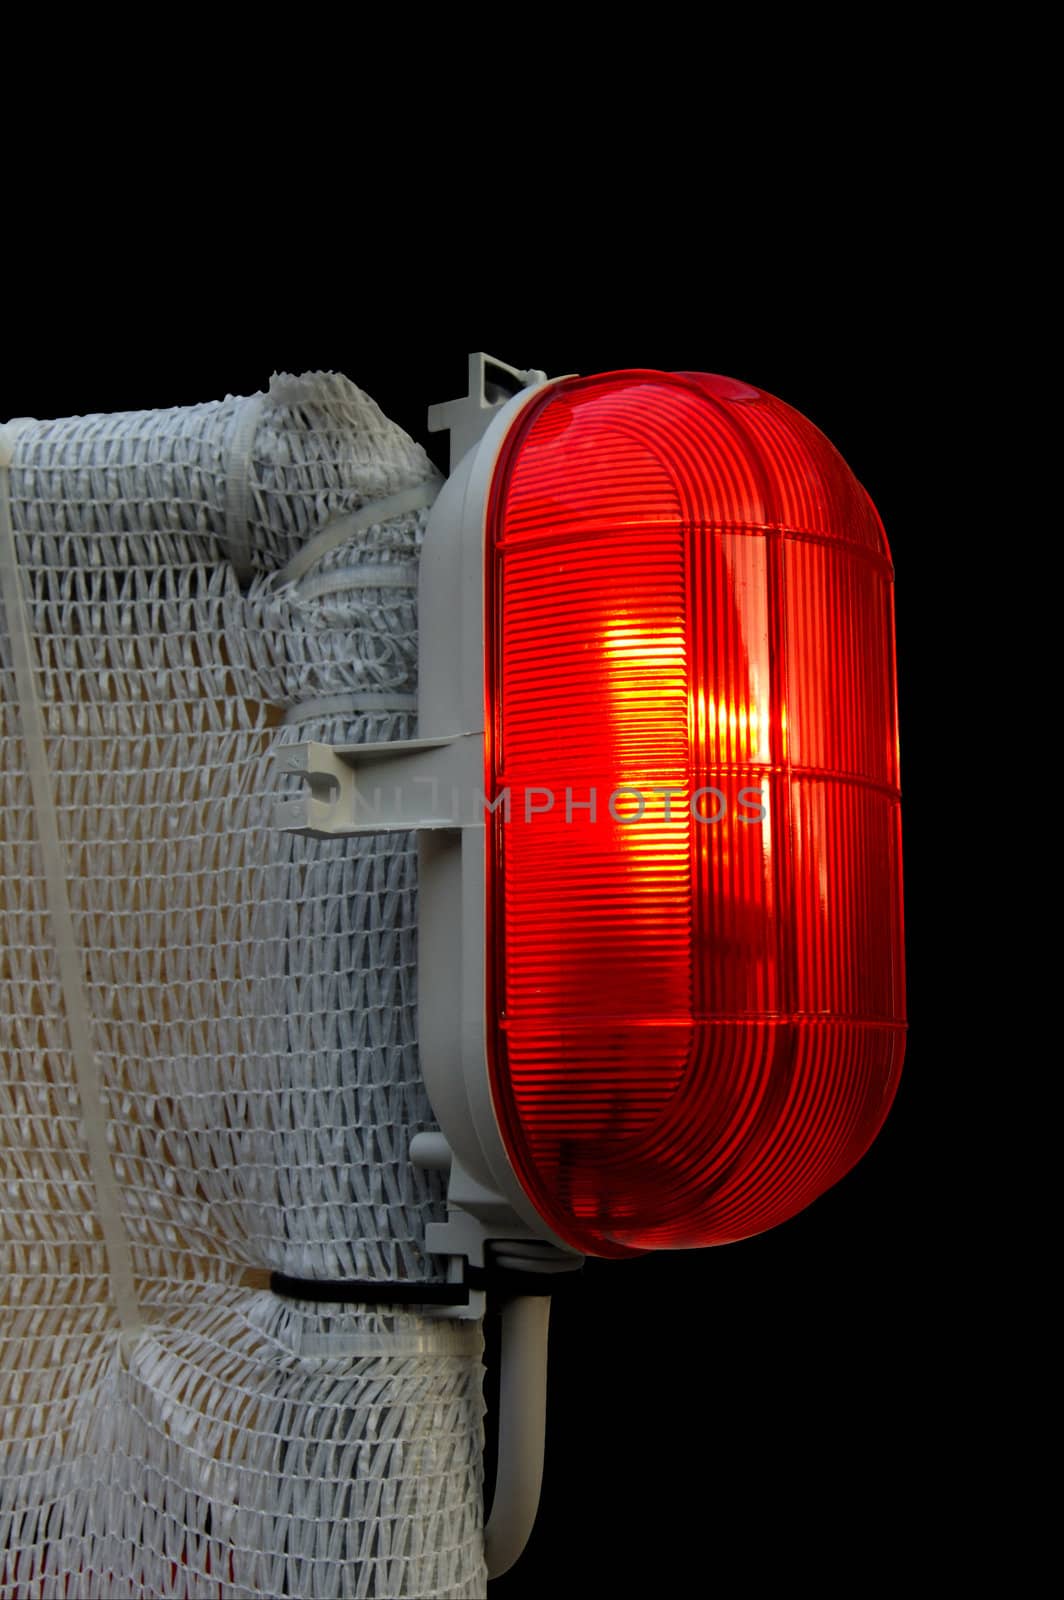 A red warning lamp, illuminated, set against a black background. Space for text on the background.